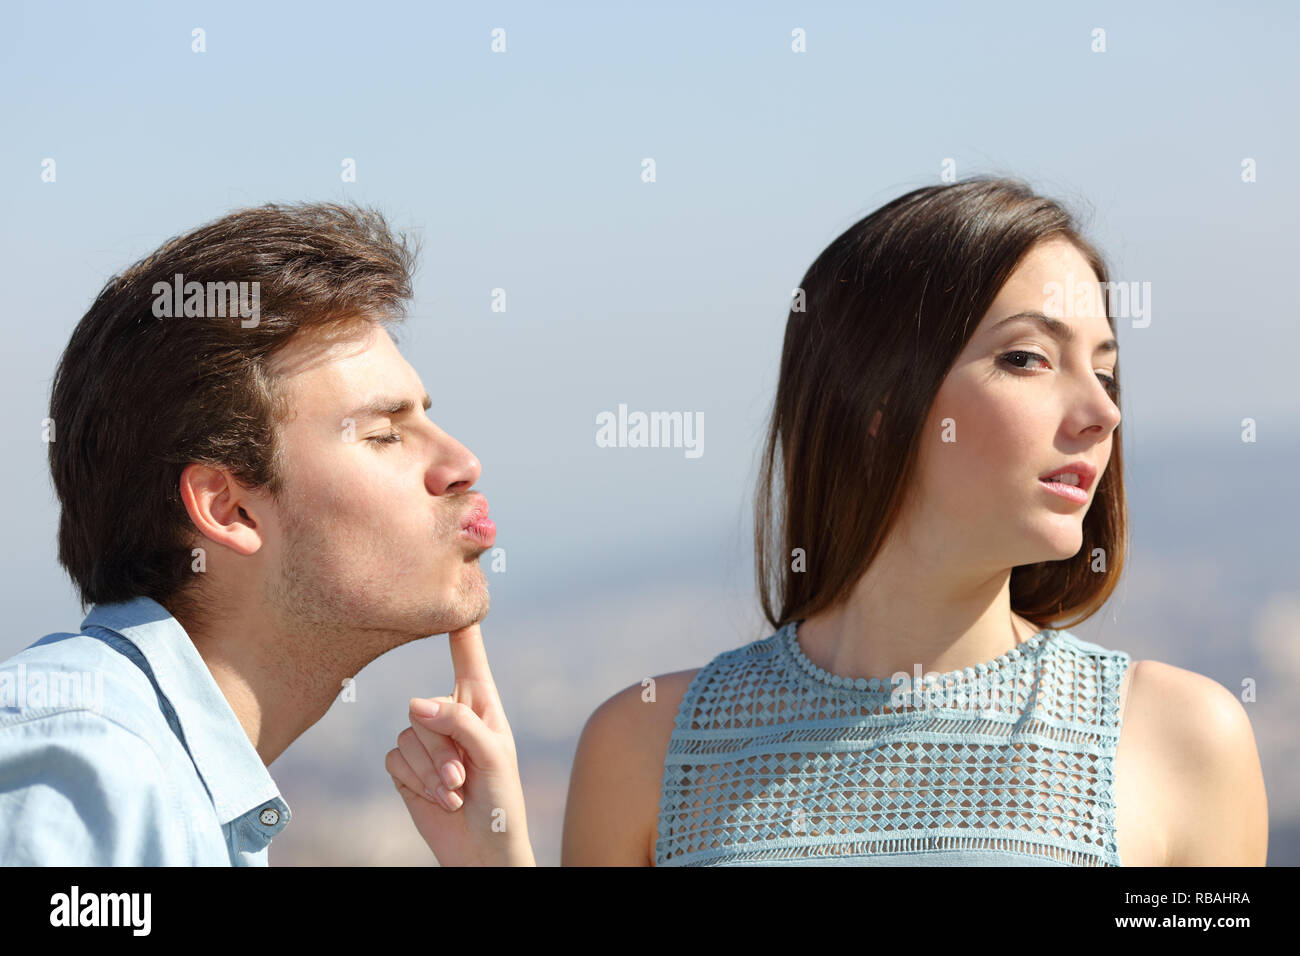 Rejet d'une femme amie kiss in a sunny day Banque D'Images